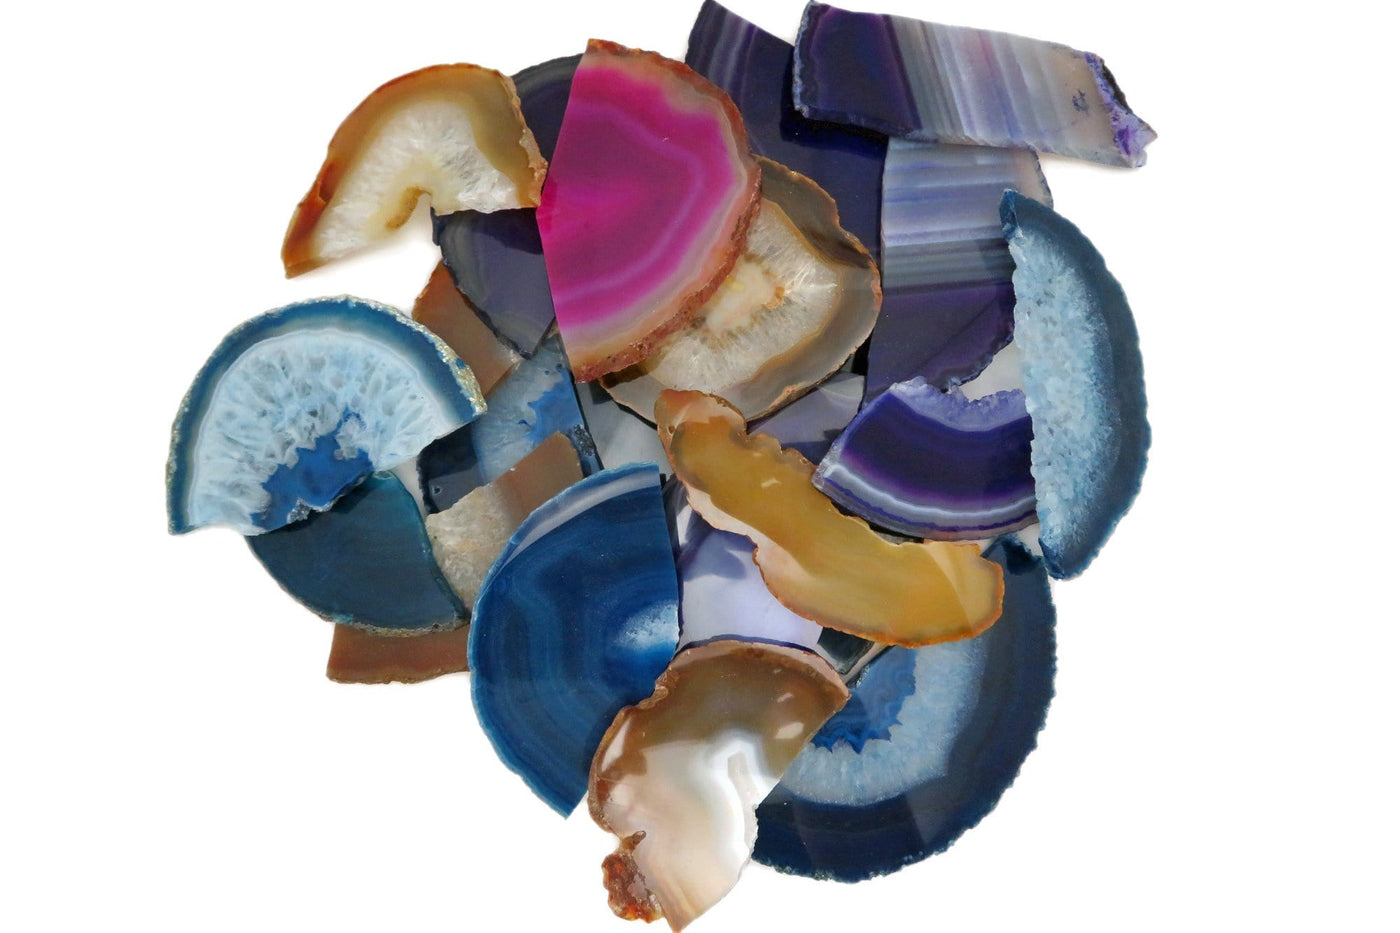 Assorted Agate Slices Large Broken Pieces set together on table